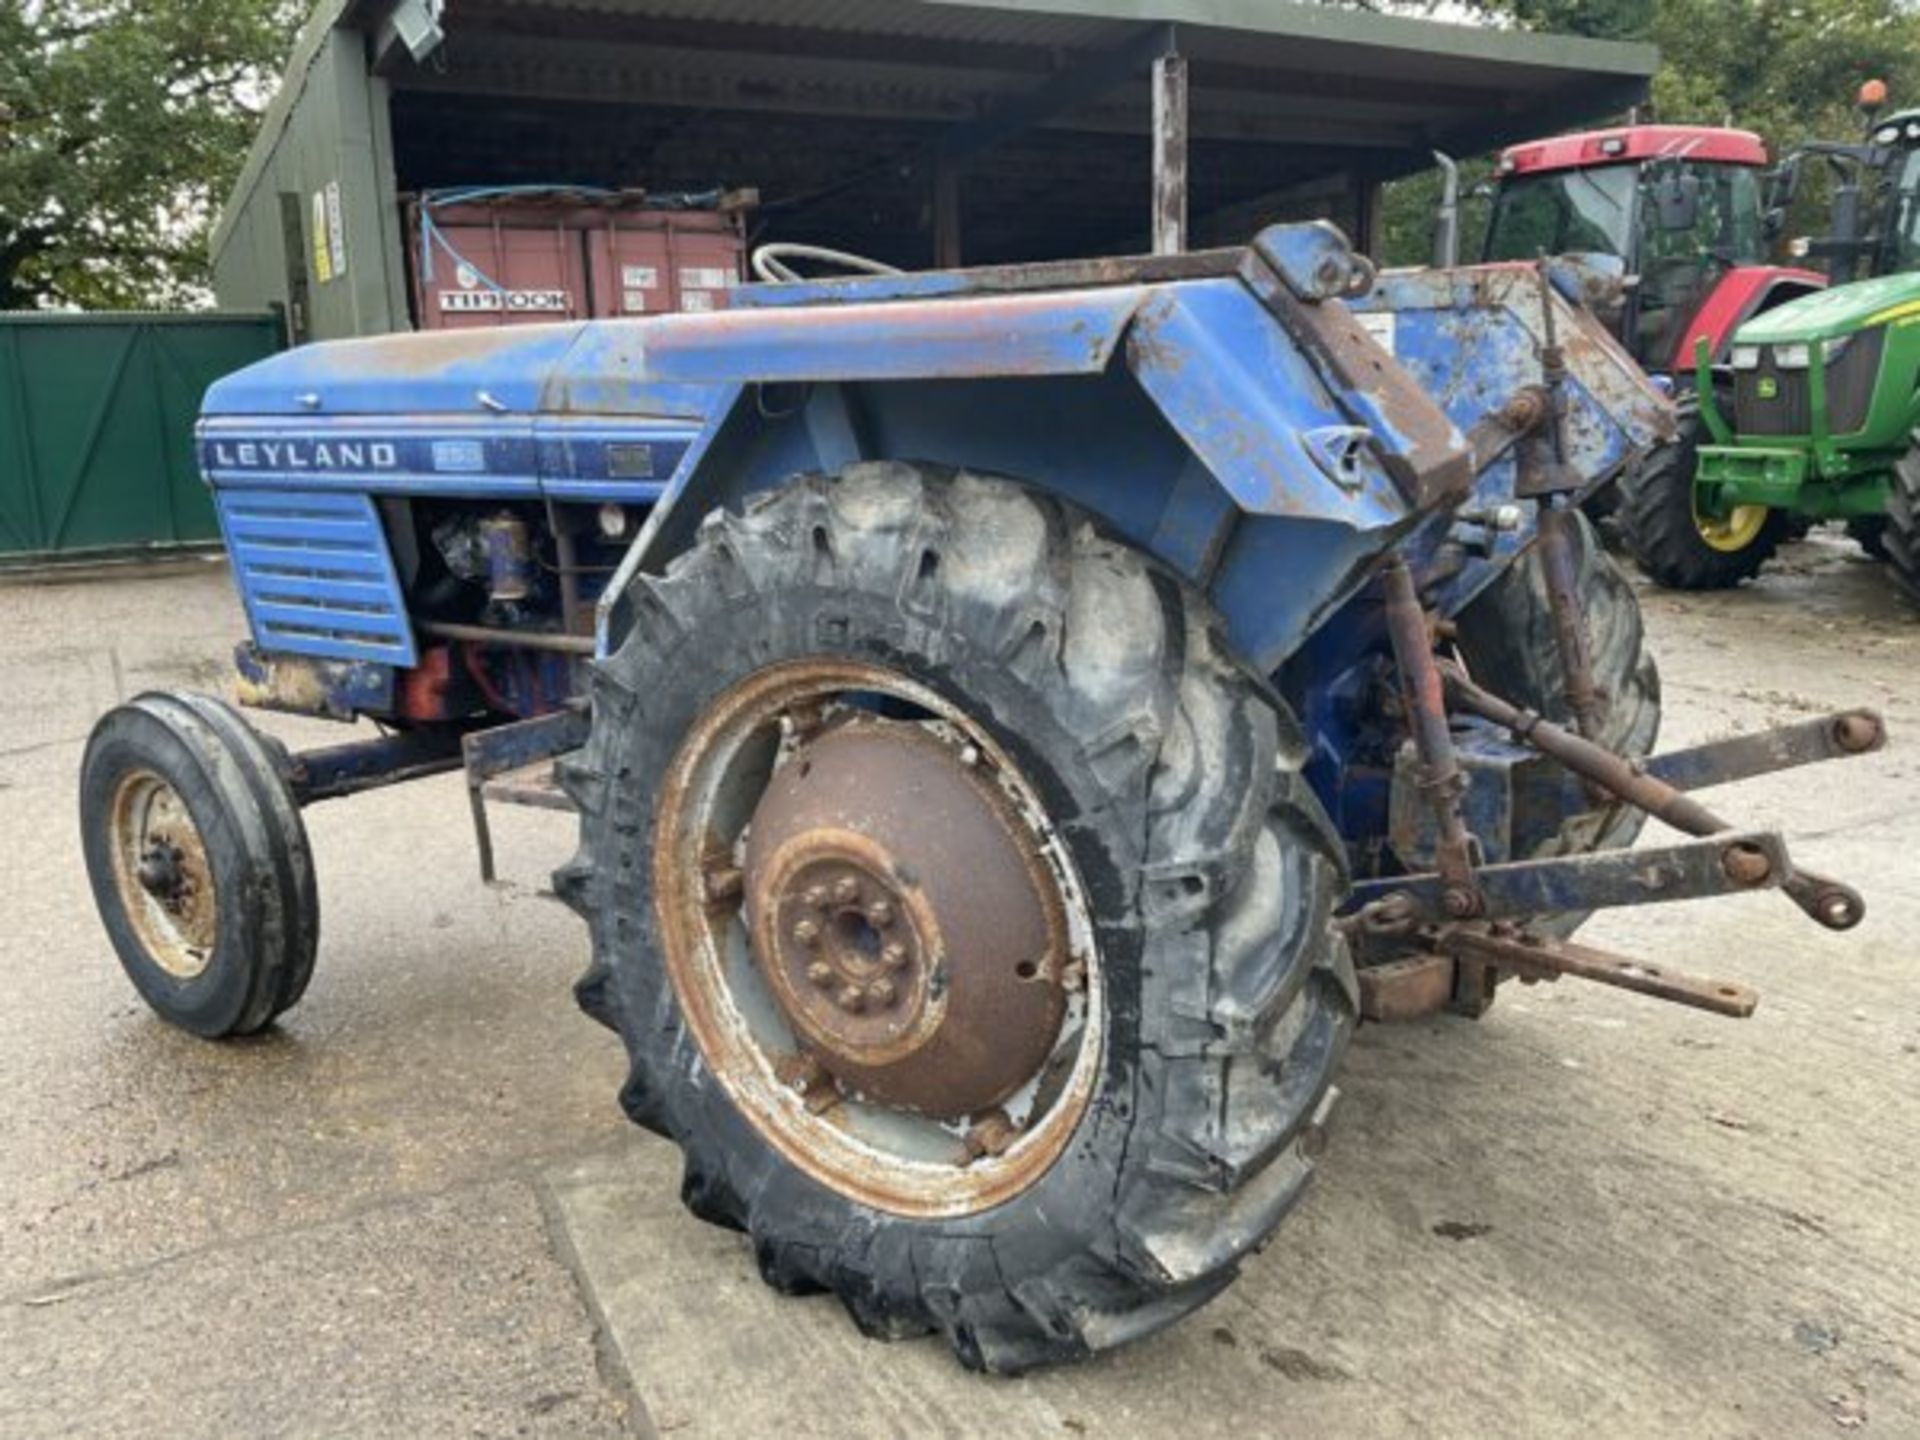 YEAR 1992 – K REG LEYLAND 253 TRACTOR. COMES WITH PART CAB. 3 CYLINDER PERKINS ENGINE - Image 8 of 14